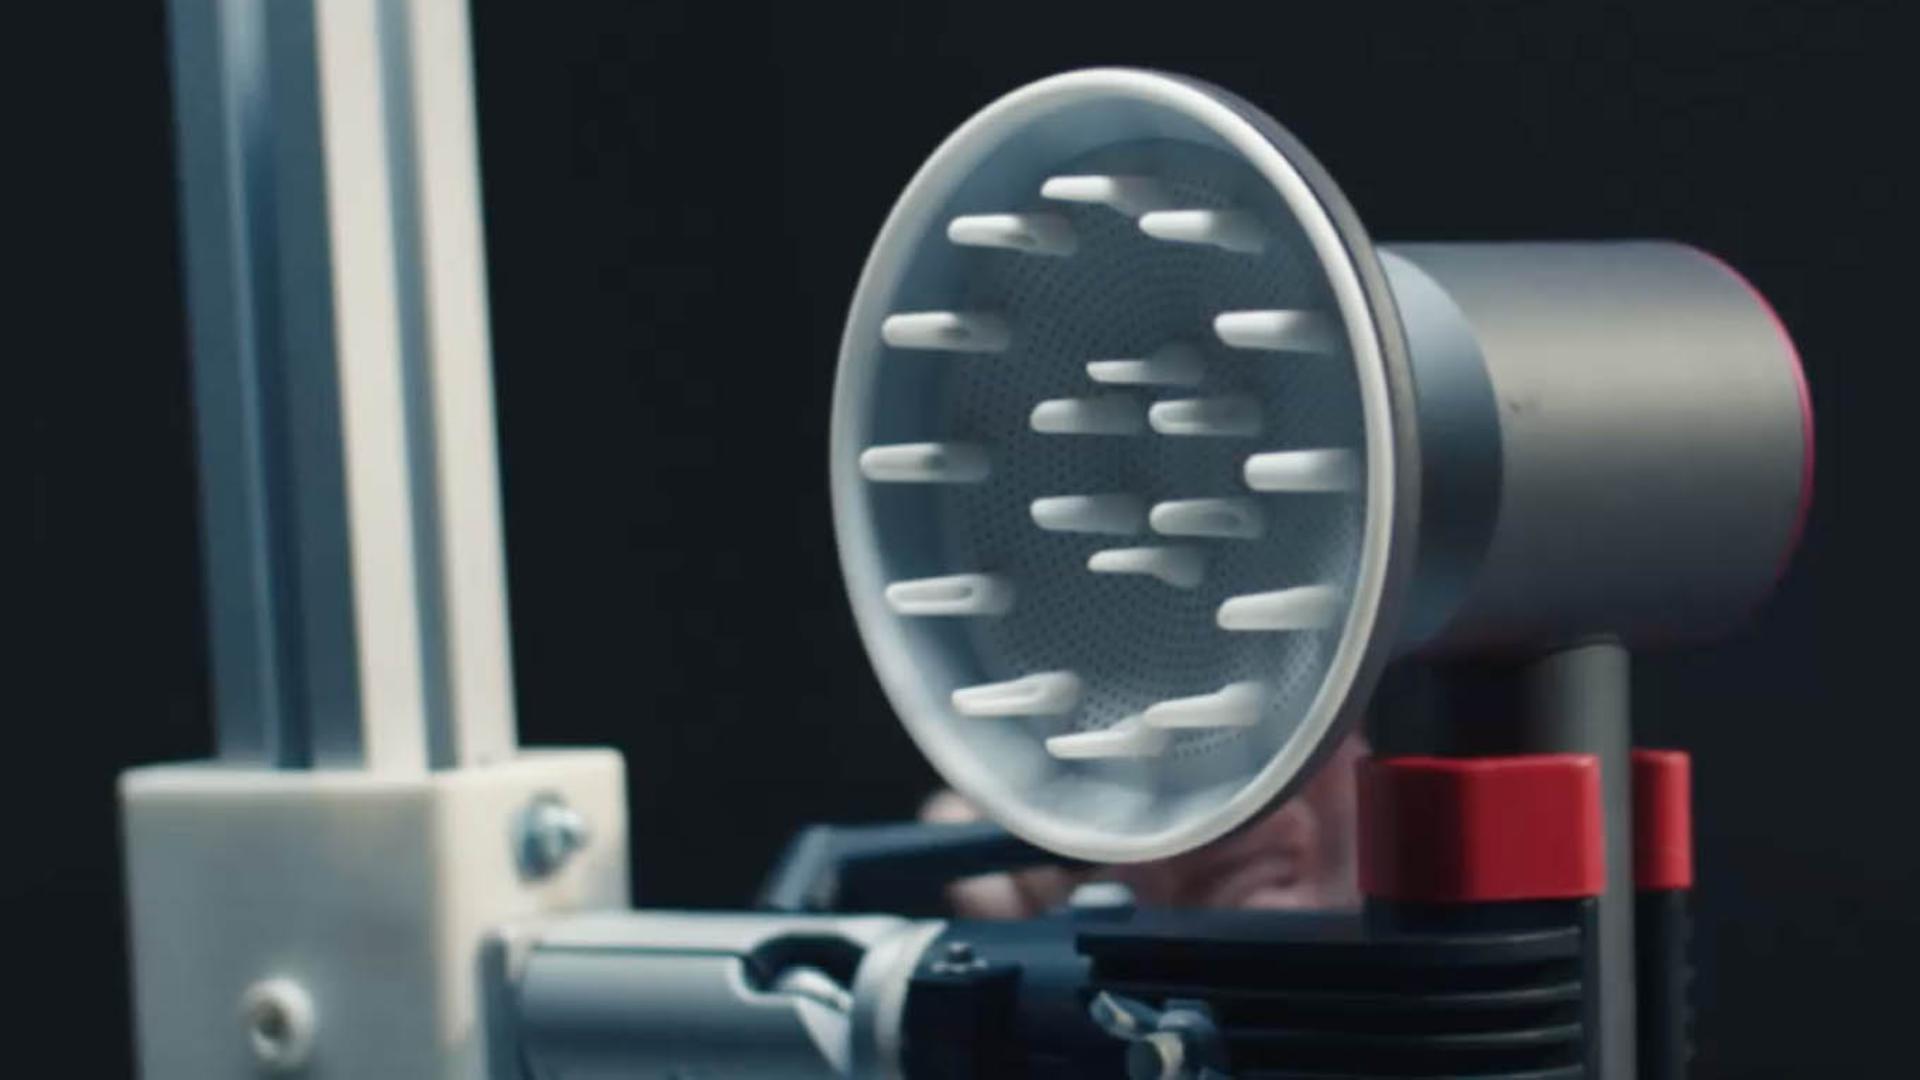 The engineering behind the Dyson Diffuser attachment